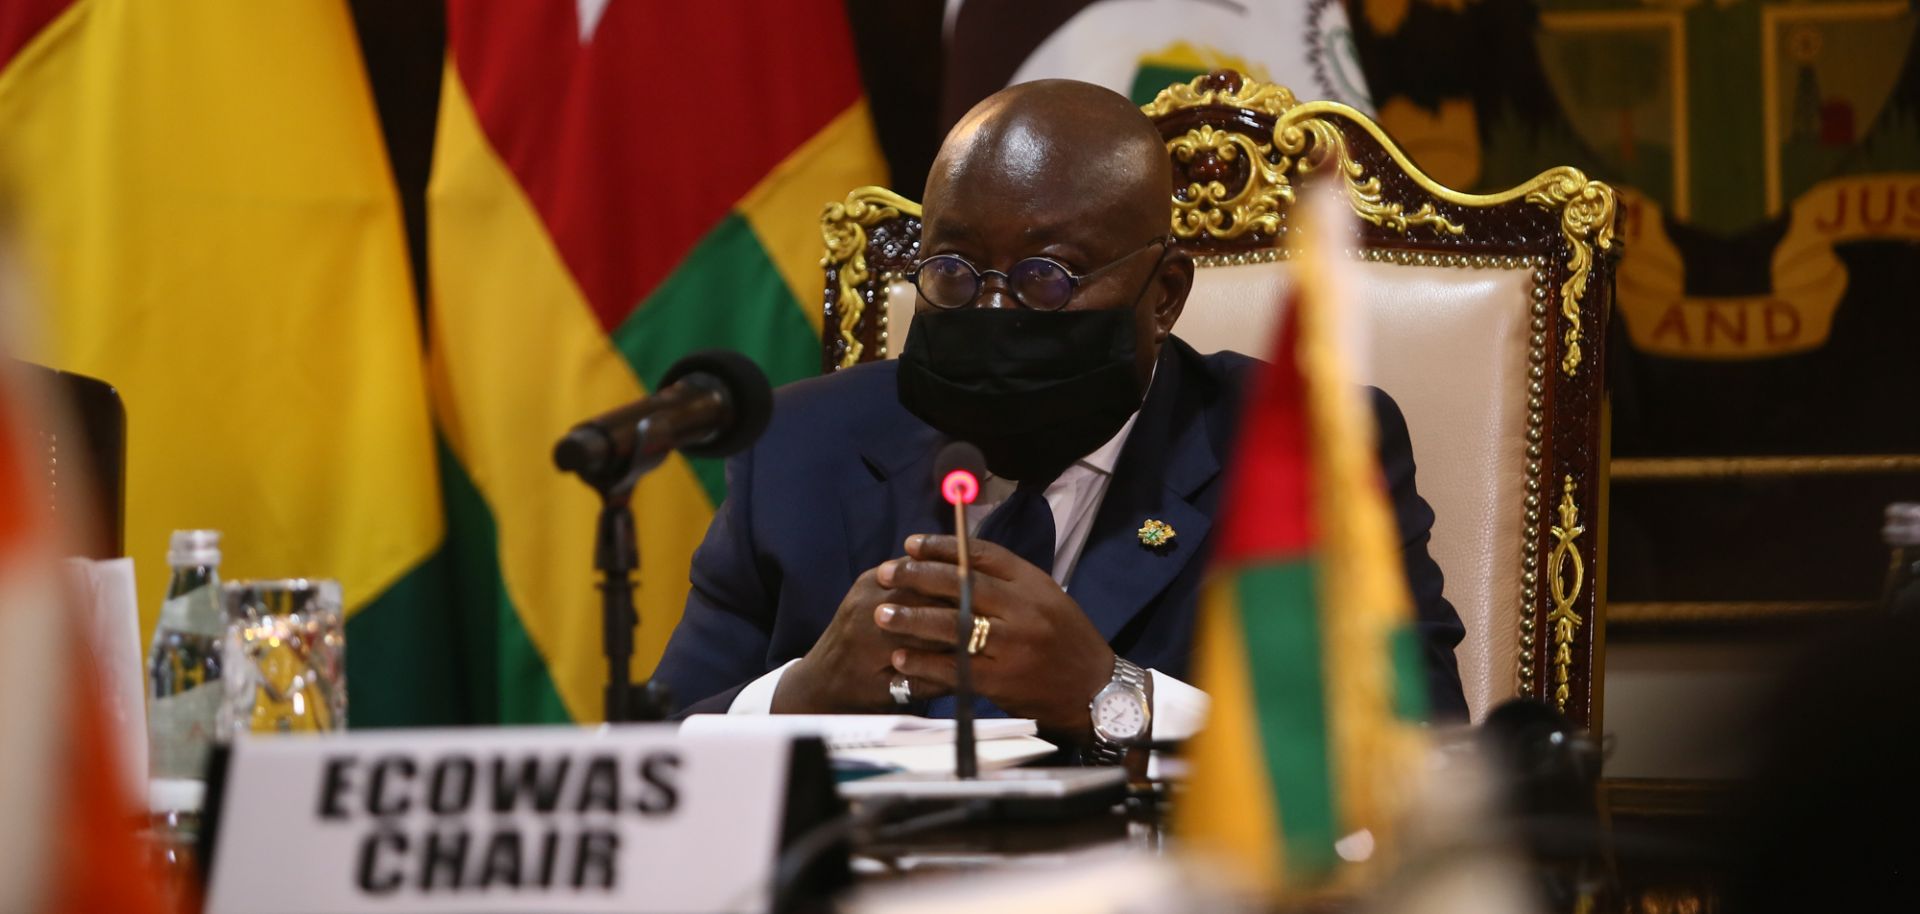 Ghana President Nana Akufo-Addo is seen at an Economic Community of West African States (ECOWAS) meeting in Accra, Ghana, on Sept. 15, 2020. 